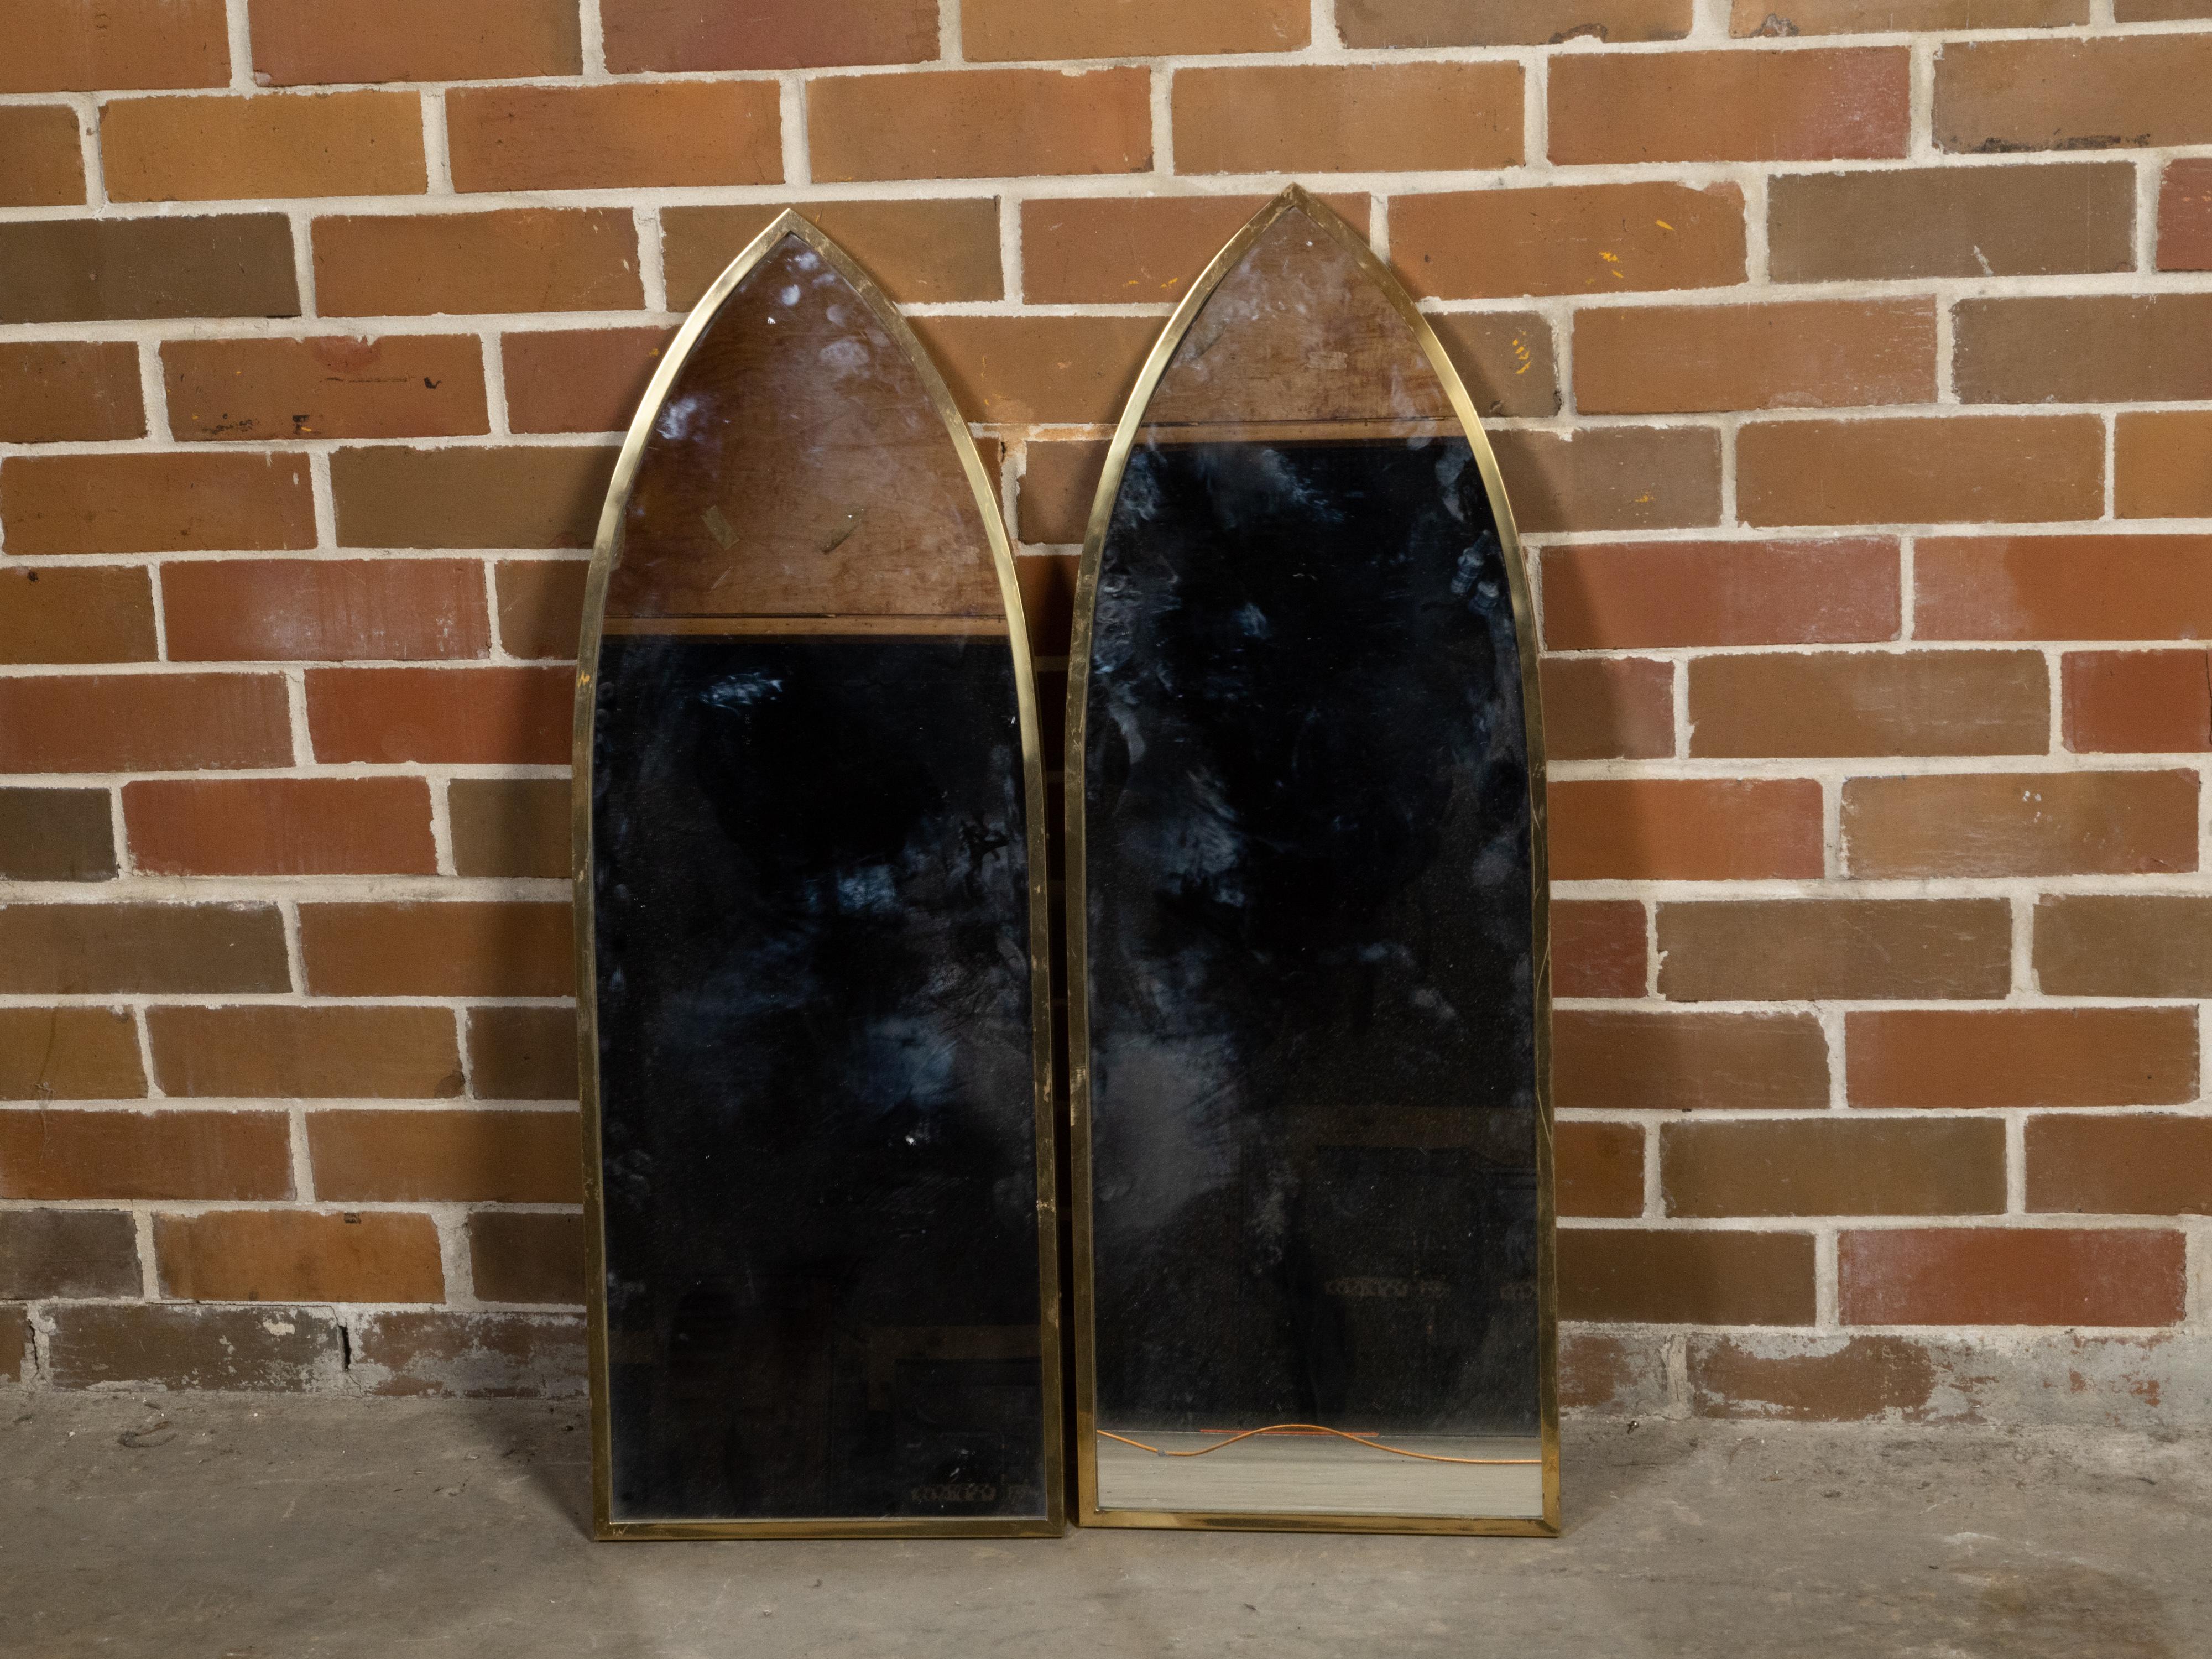 A pair of European vintage Neo Gothic style brass wall mirrors from the mid 20th century, with pointed arch silhouettes. Created during the Midcentury period, this pair of vintage European mirrors draws our attention with their Neo Gothic lines